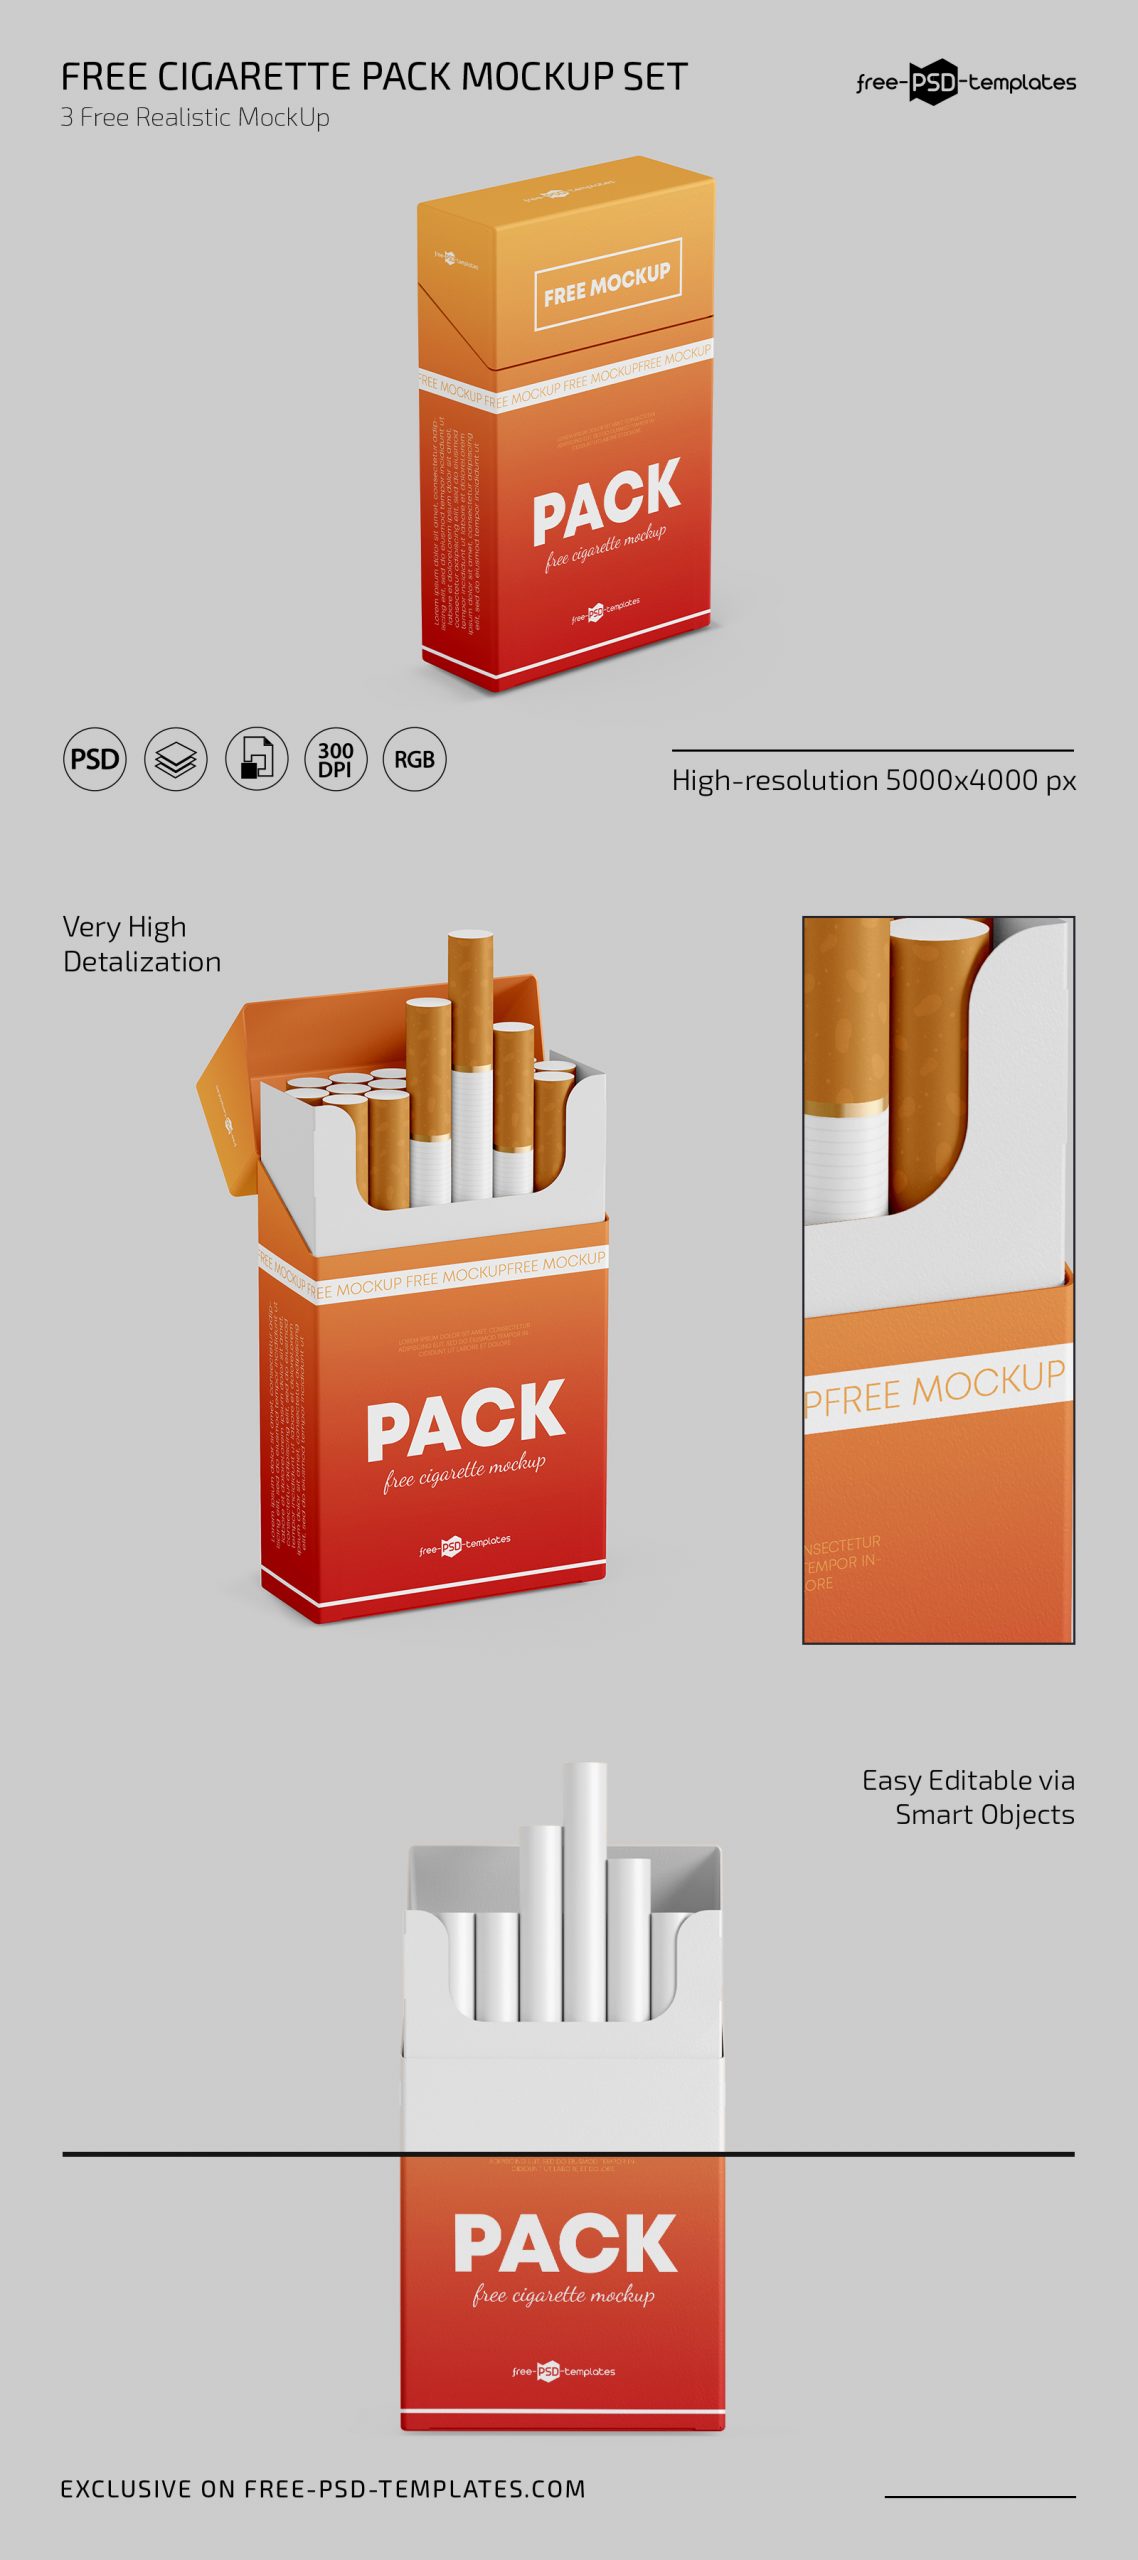 14-best-printable-cigarette-template-pdf-for-free-at-printablee